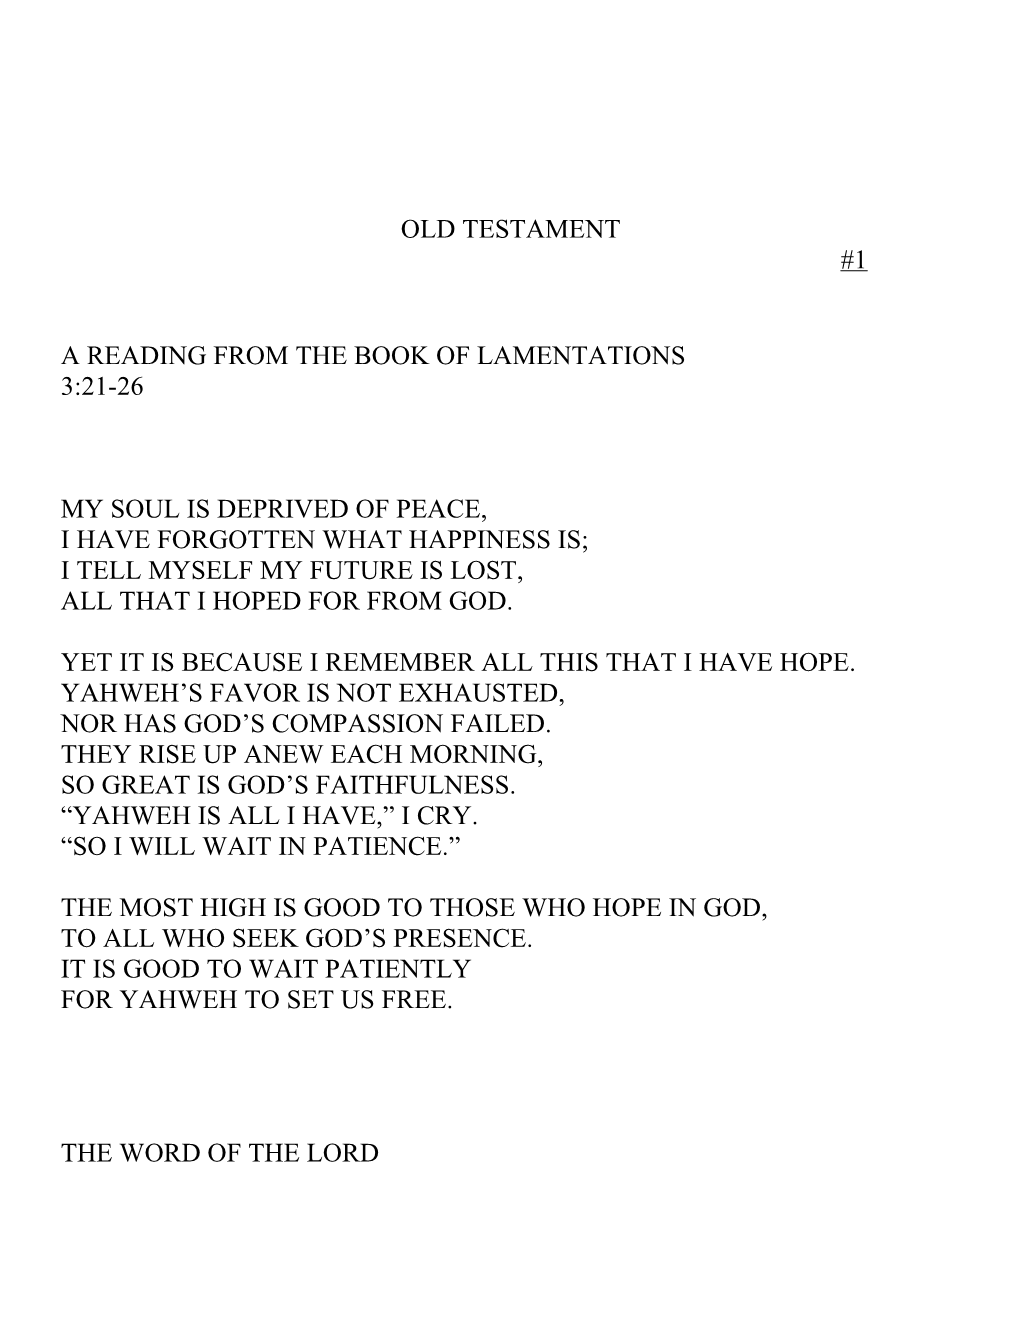 A Reading from the Book of Lamentations